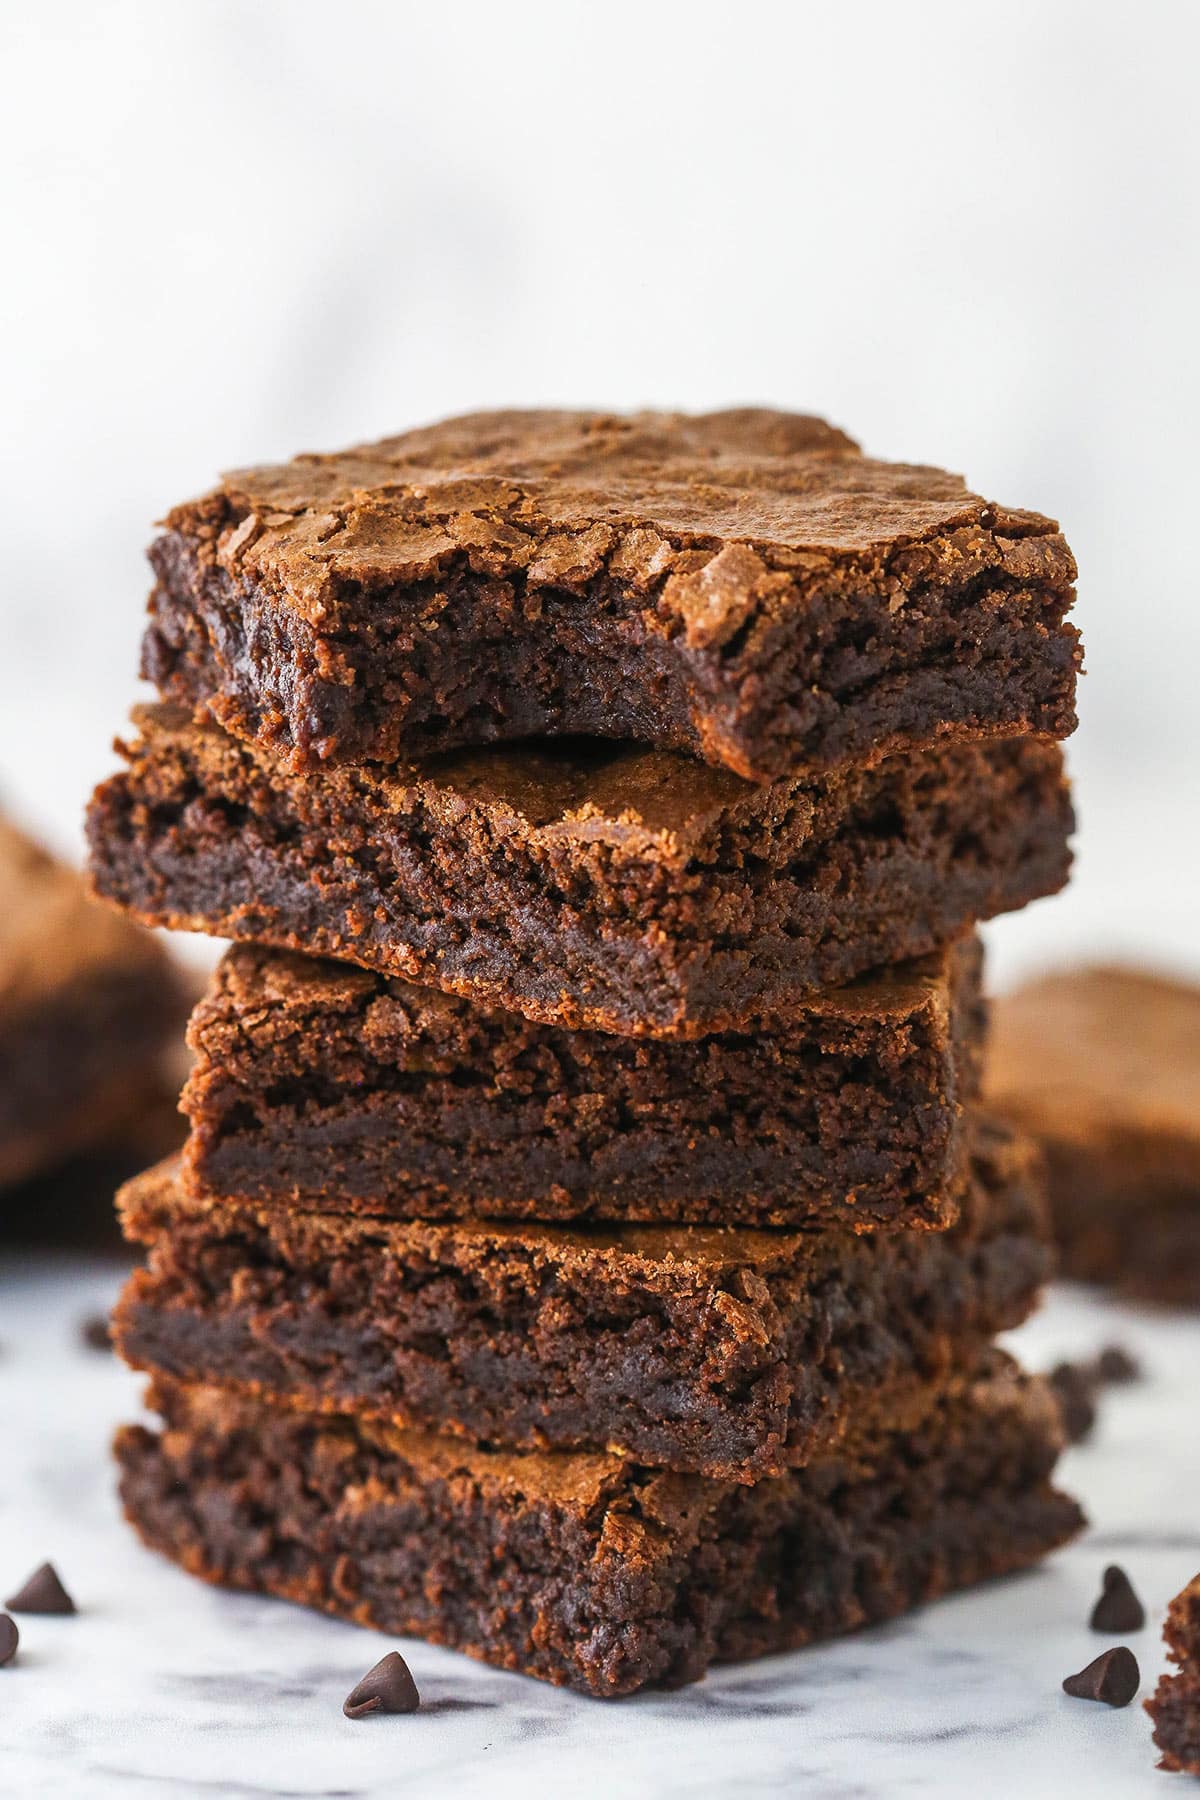 A stack of homemade brownies. The top one has a bite taken out of it.